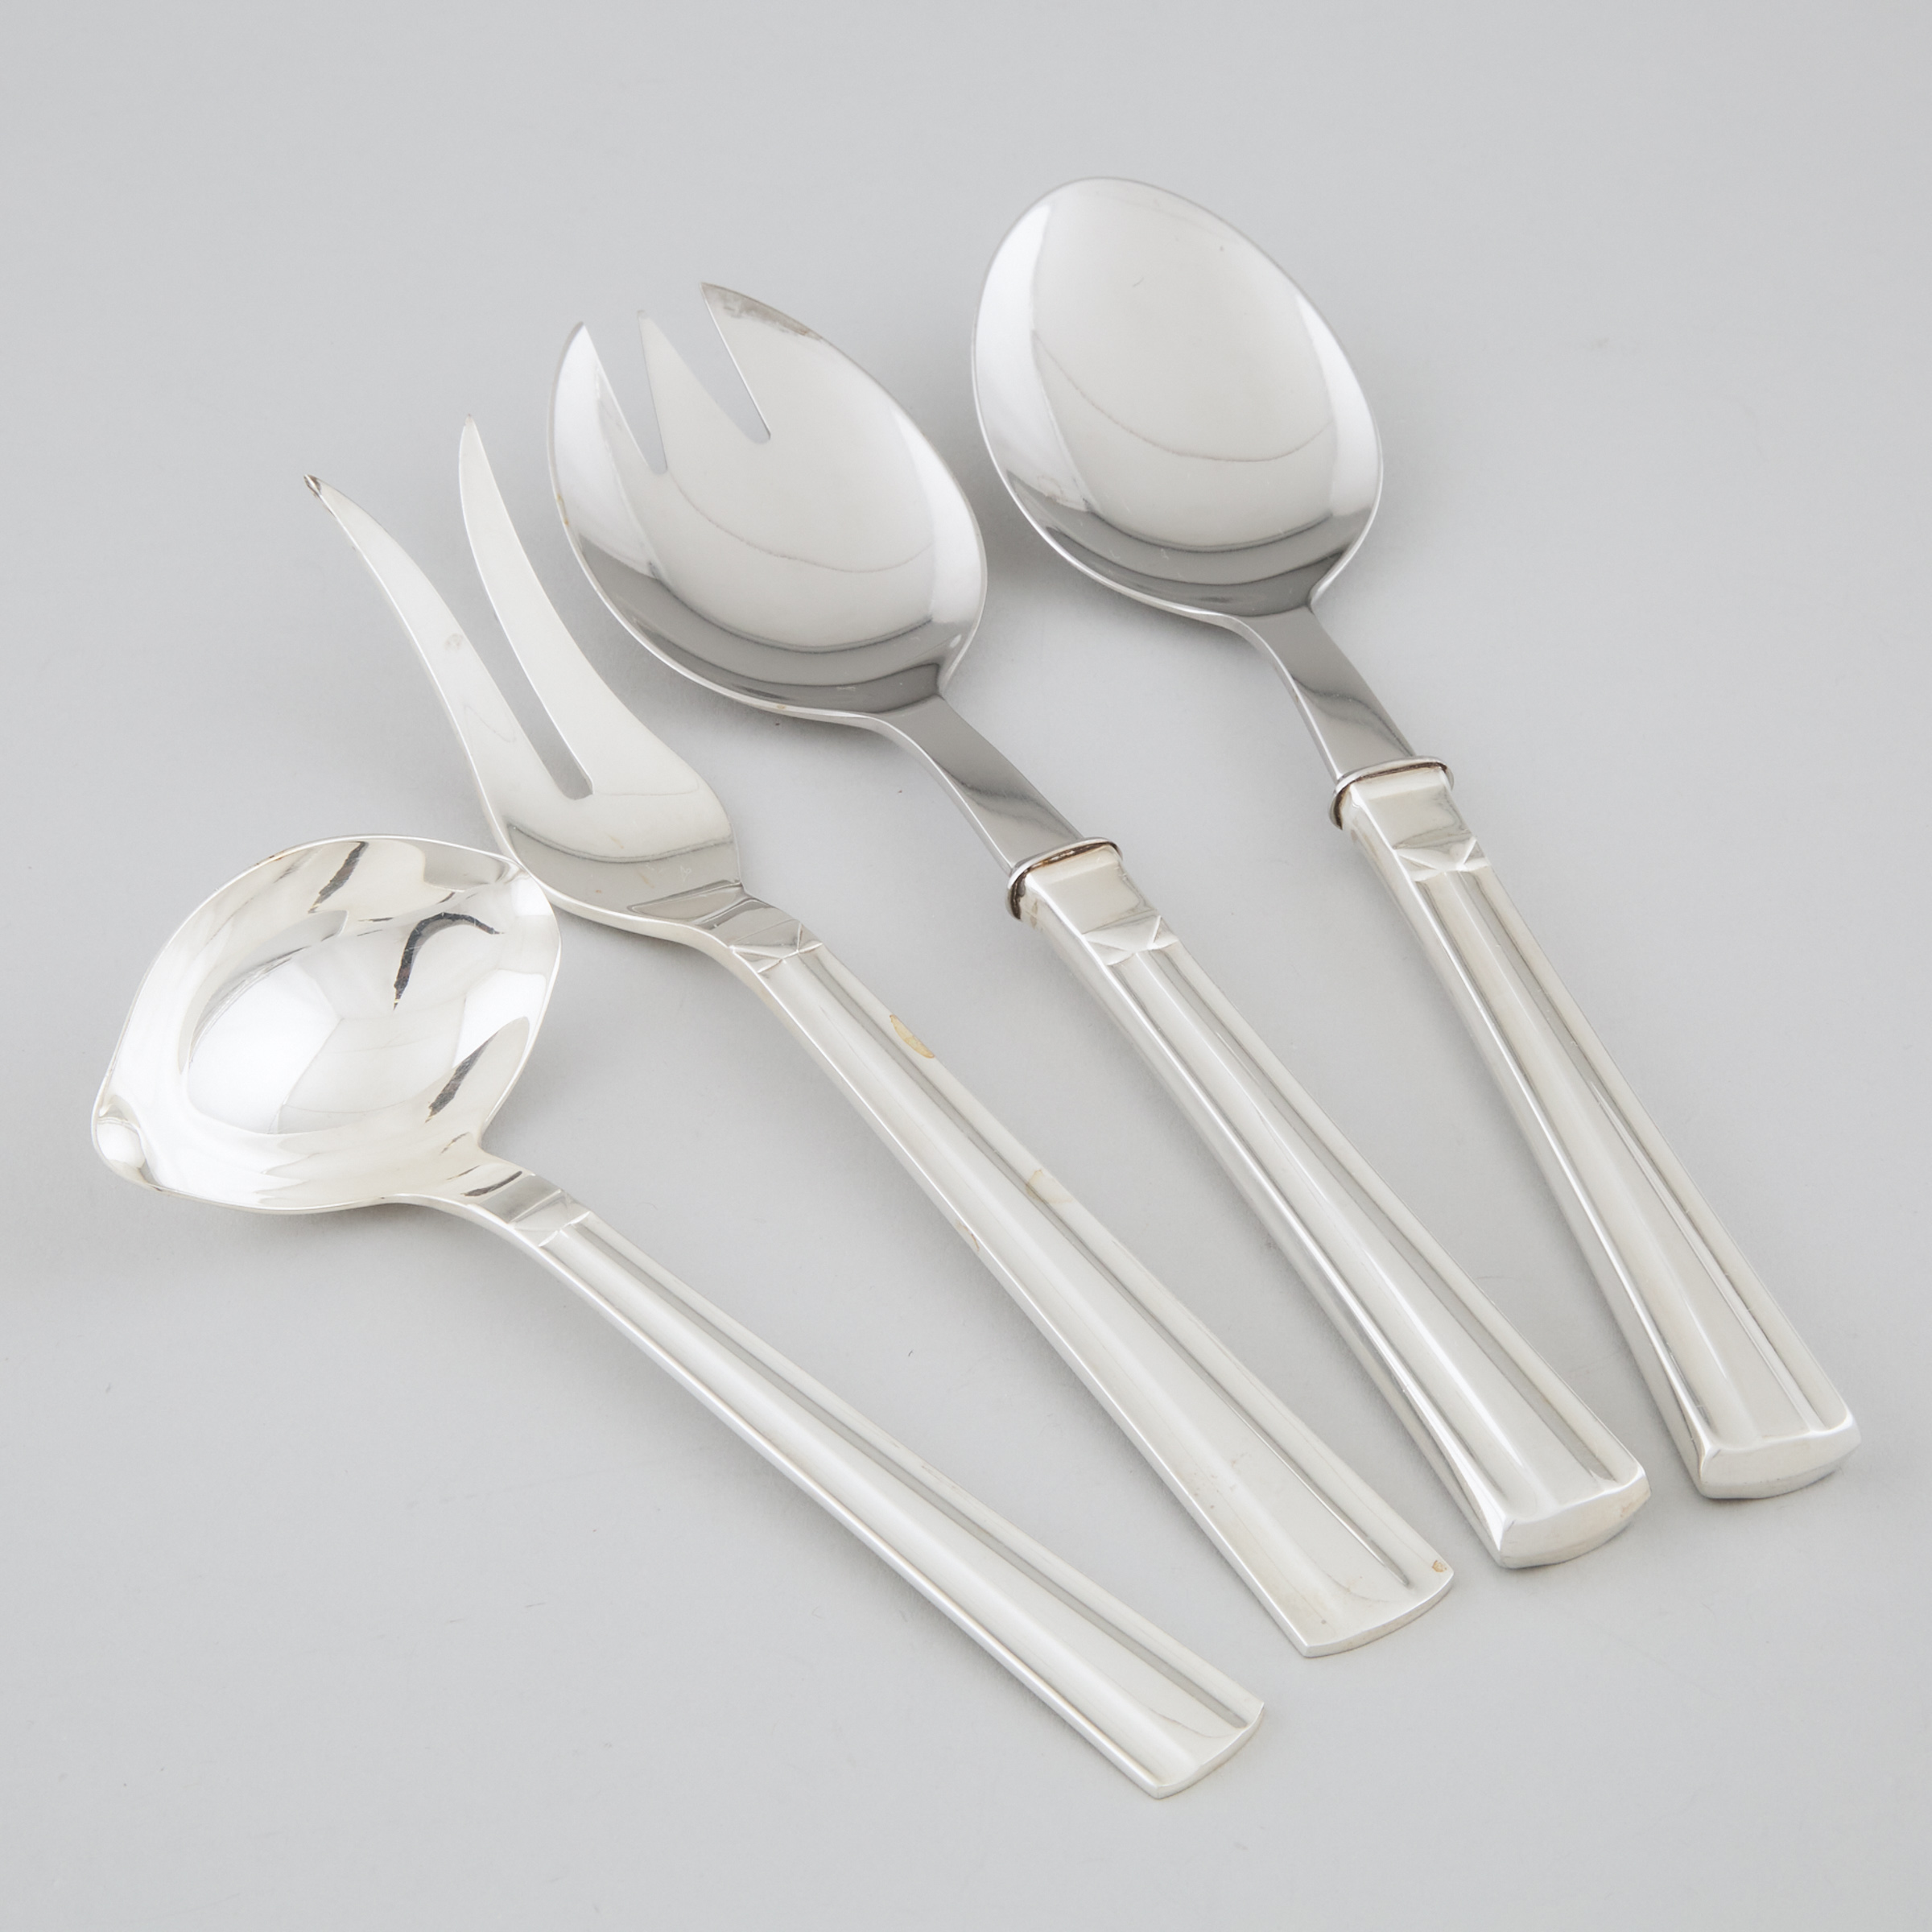 Pair of Danish Silver Salad Servers, Cold Meat Fork and a Sauce Ladle, Magasin du Nord, Copenhagen, 1958/59